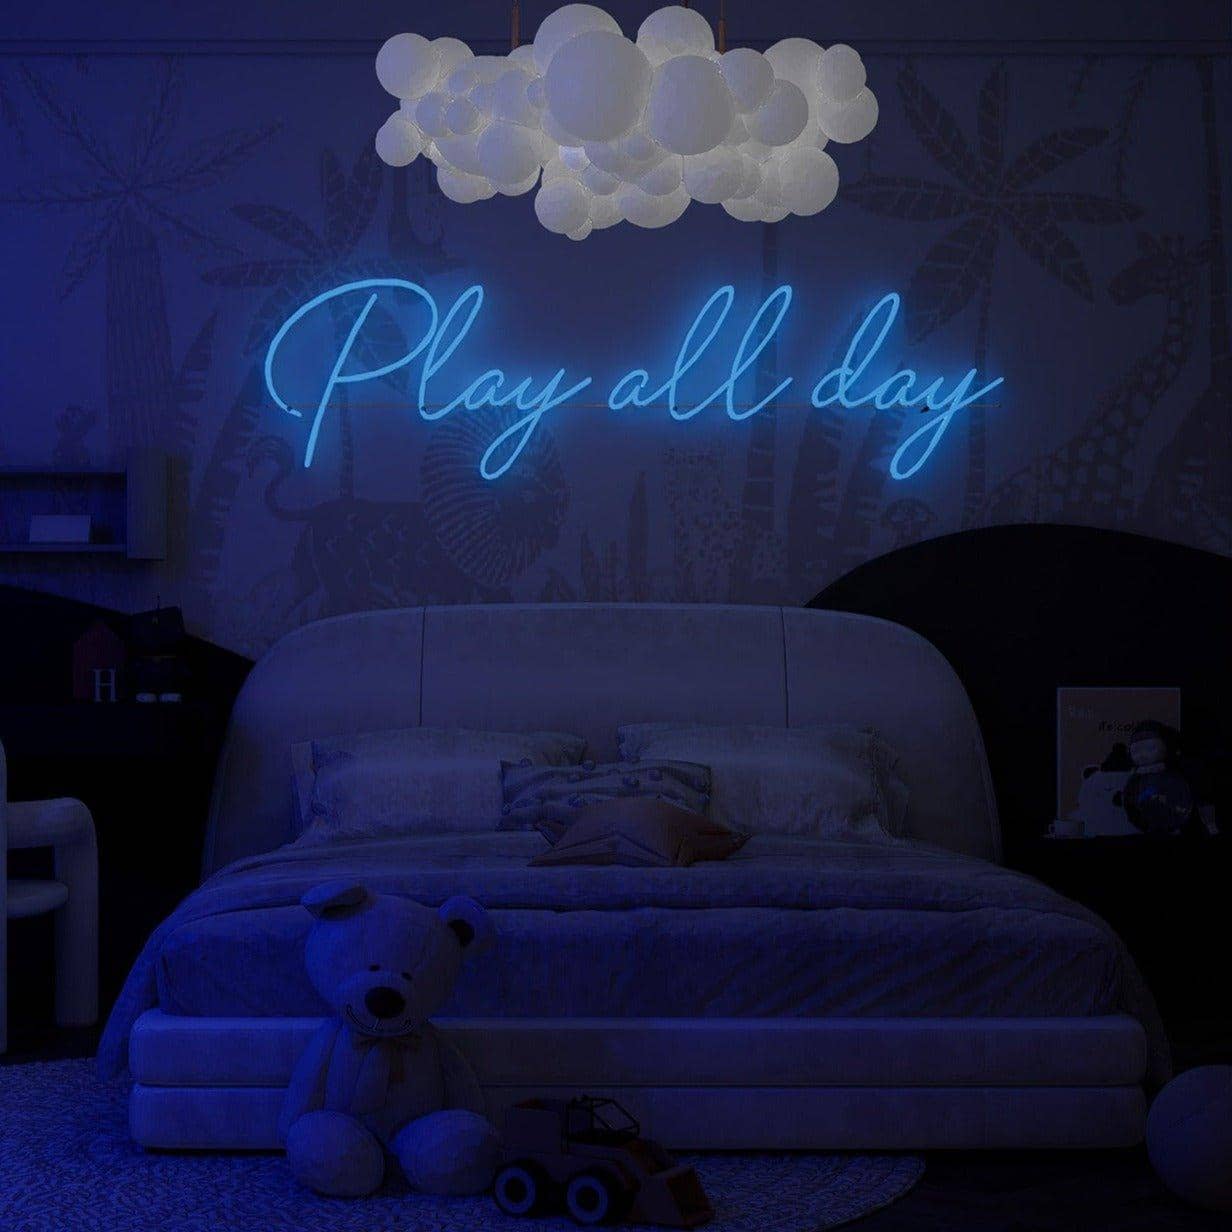 light-up-blue-neon-lights-hanging-in-bedroom-display-at-night-play-all-day